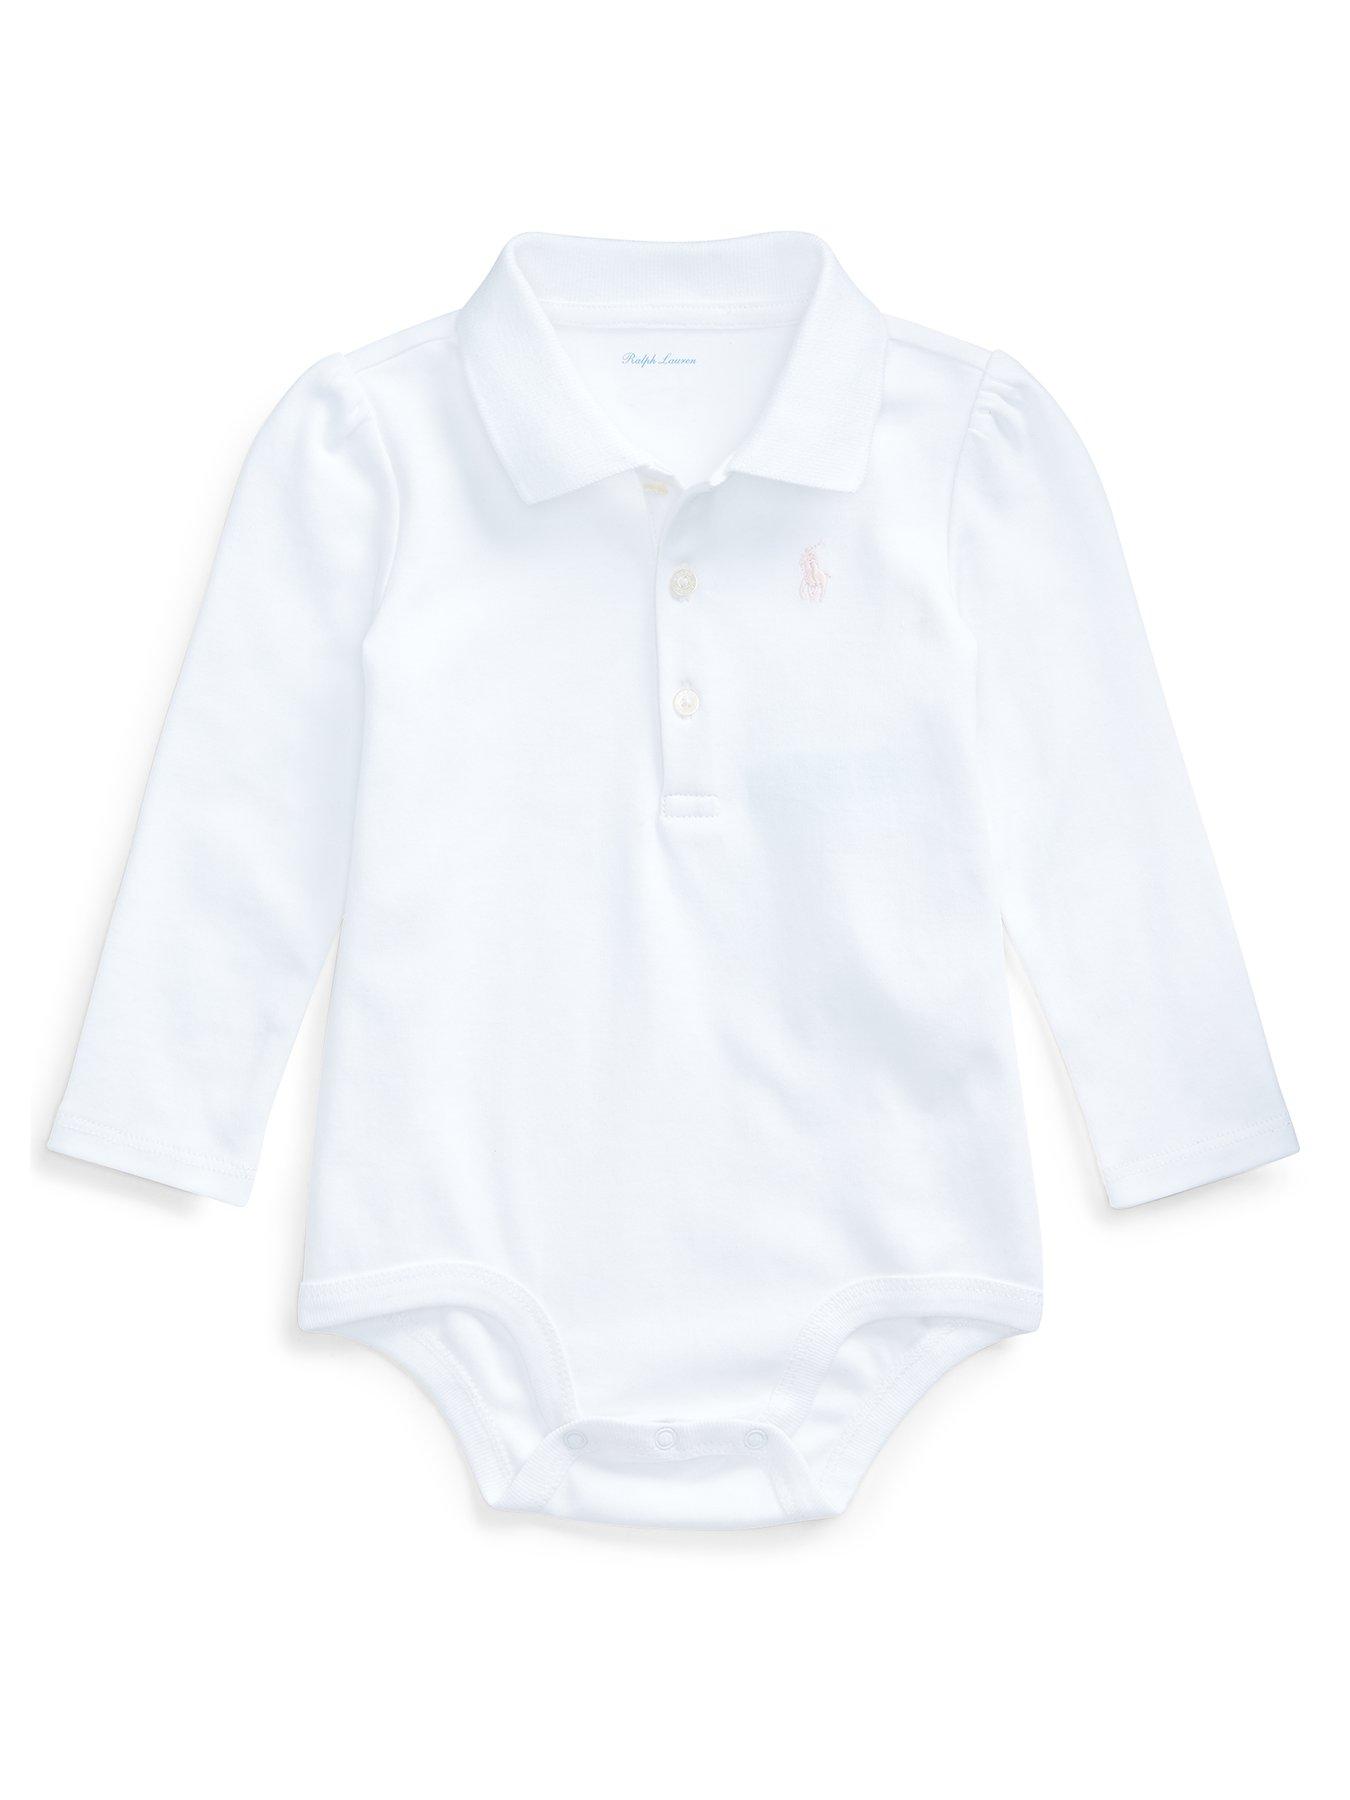 polo outlet for babies